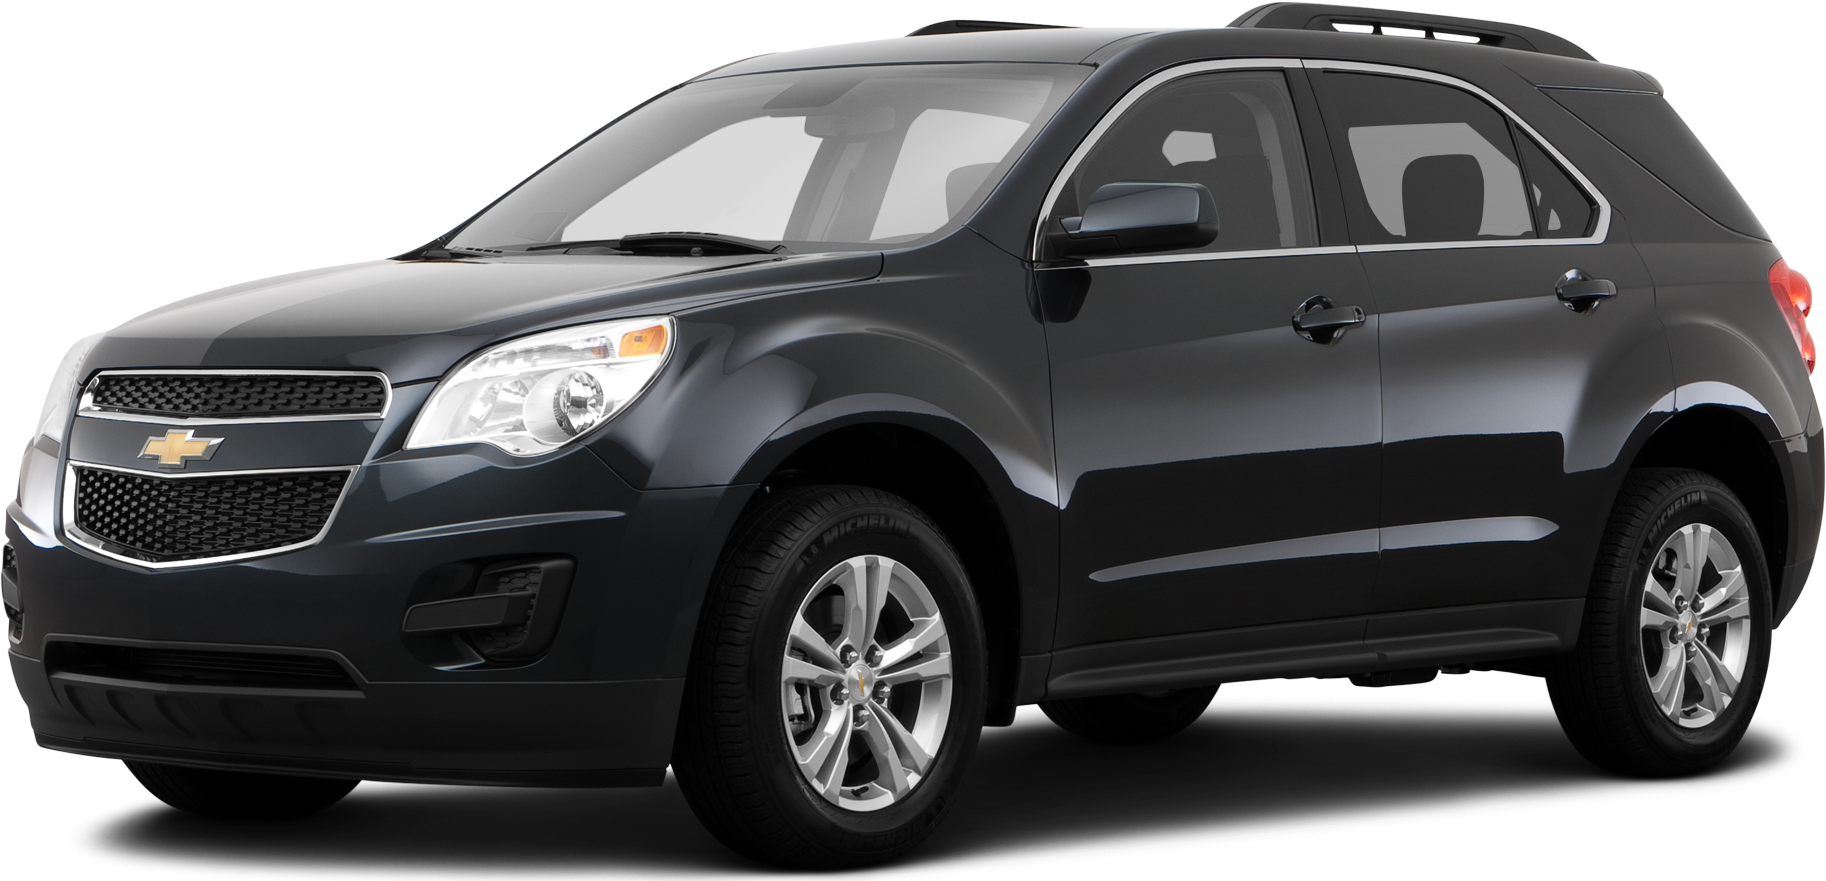 2014 Chevy Equinox Values & Cars for Sale Kelley Blue Book